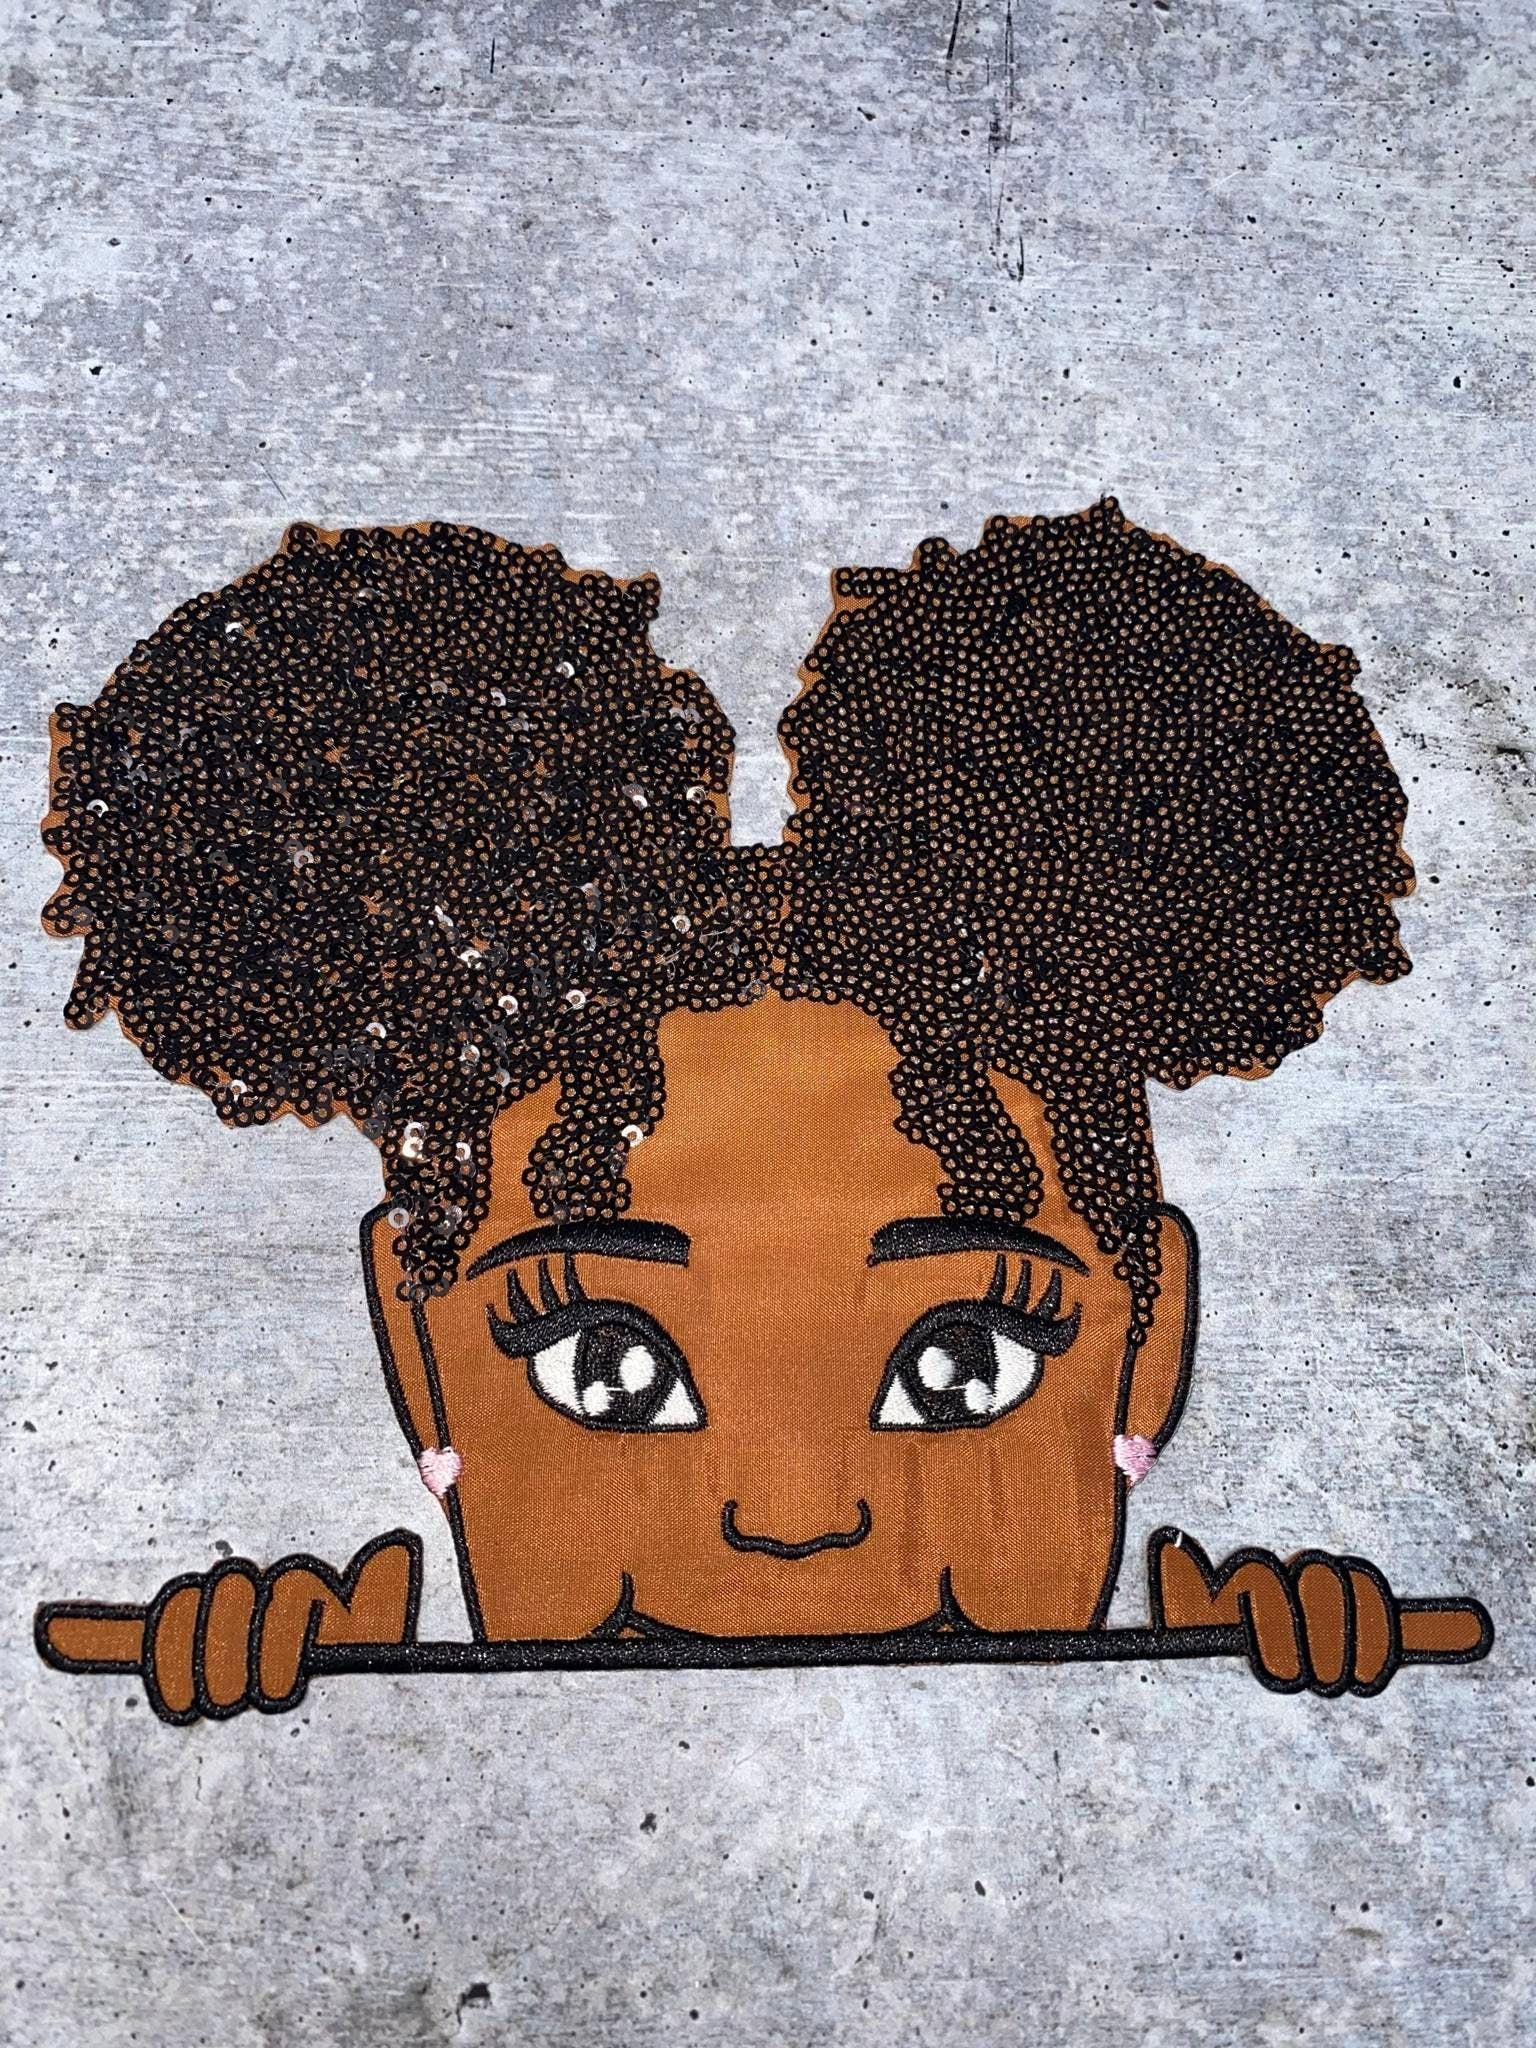 New, SEQUINS & Satin Peek-a-boo "Lisa" with Afro Puffs, Size 7"x7.6" Patch, Iron-on/Sew-on, Patch for Girls Jacket, Bling Patch